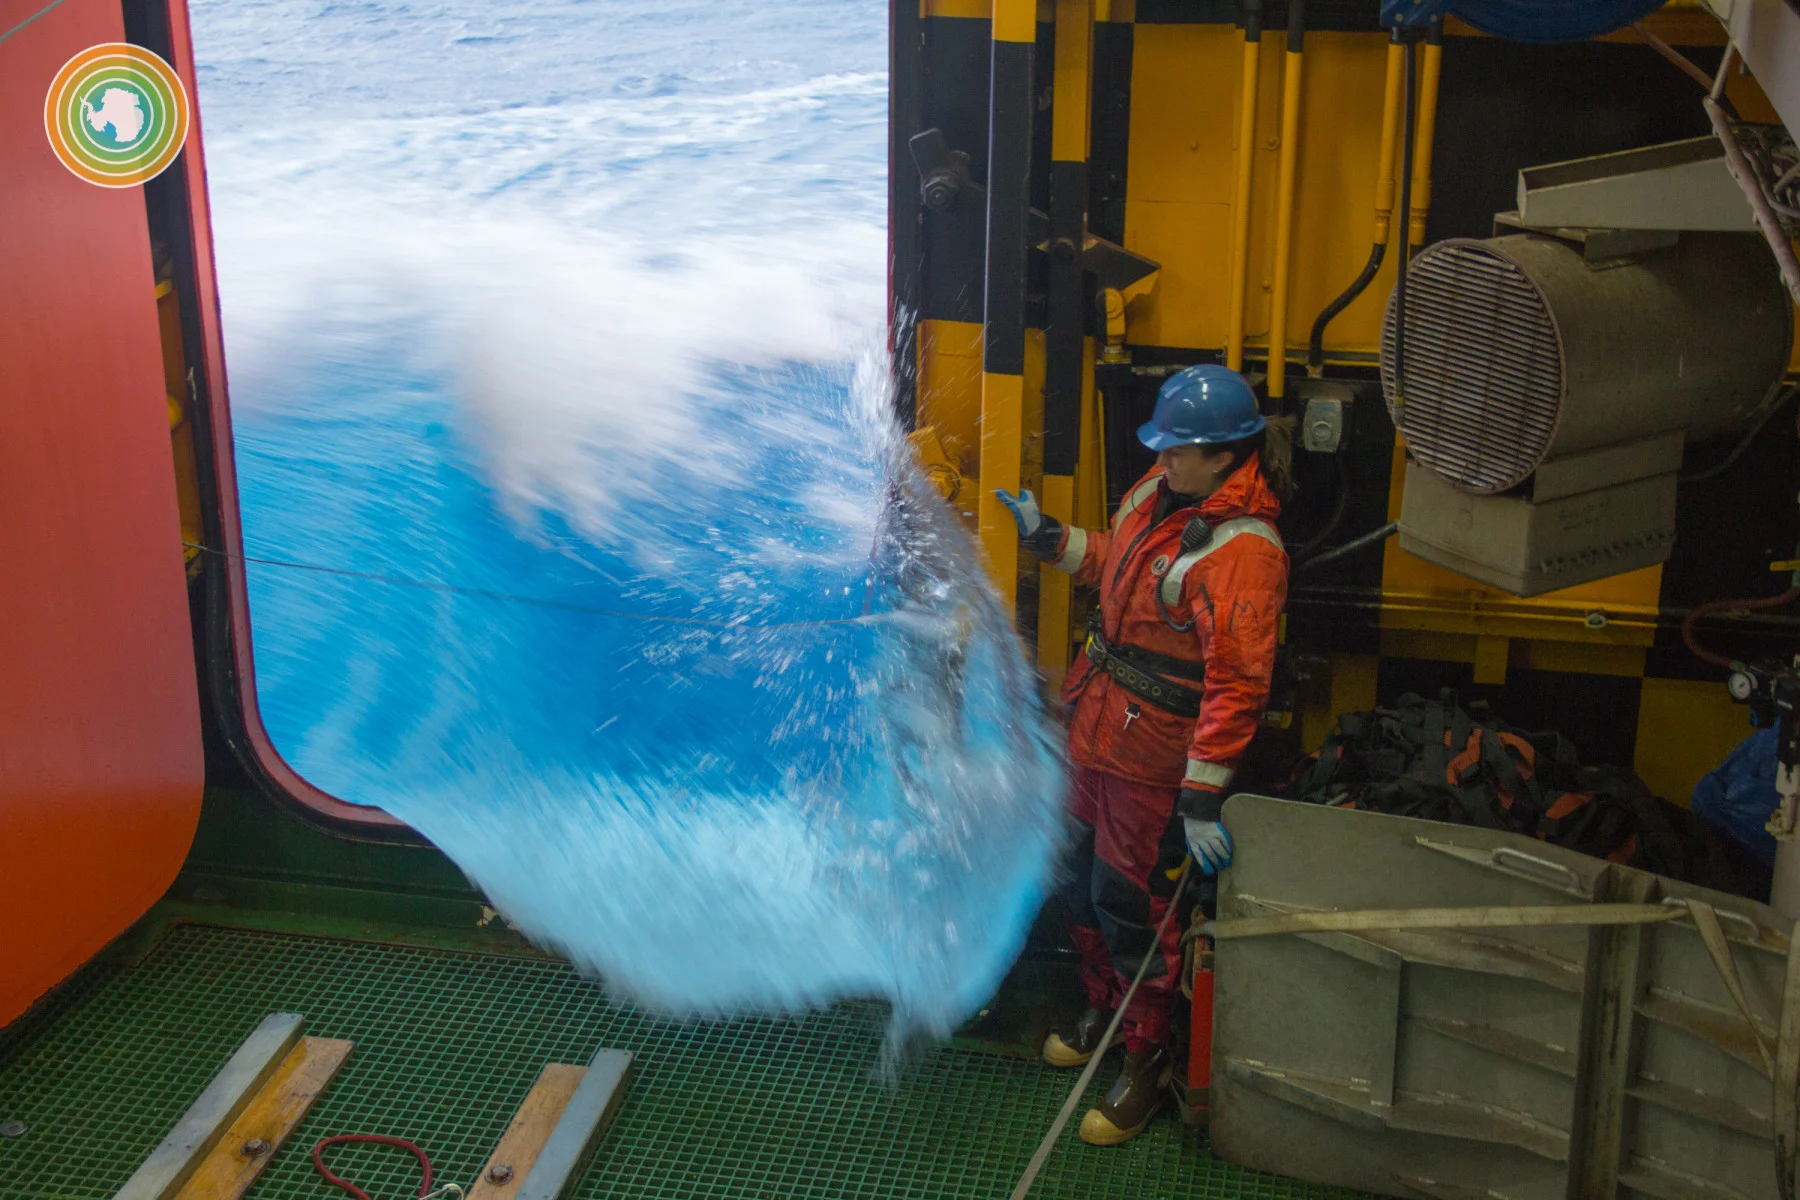 During a SOCCOM expedition on the R/V Nathaniel B. Palmer, a scientist watches as a large wave enters the Baltic Room, where the operations crew deploys and recovers equipment. She is strapped into a safety line and is waiting for a moment to safely perform the task at hand. ⁠(SOCCOM Project/ Greta Shum)